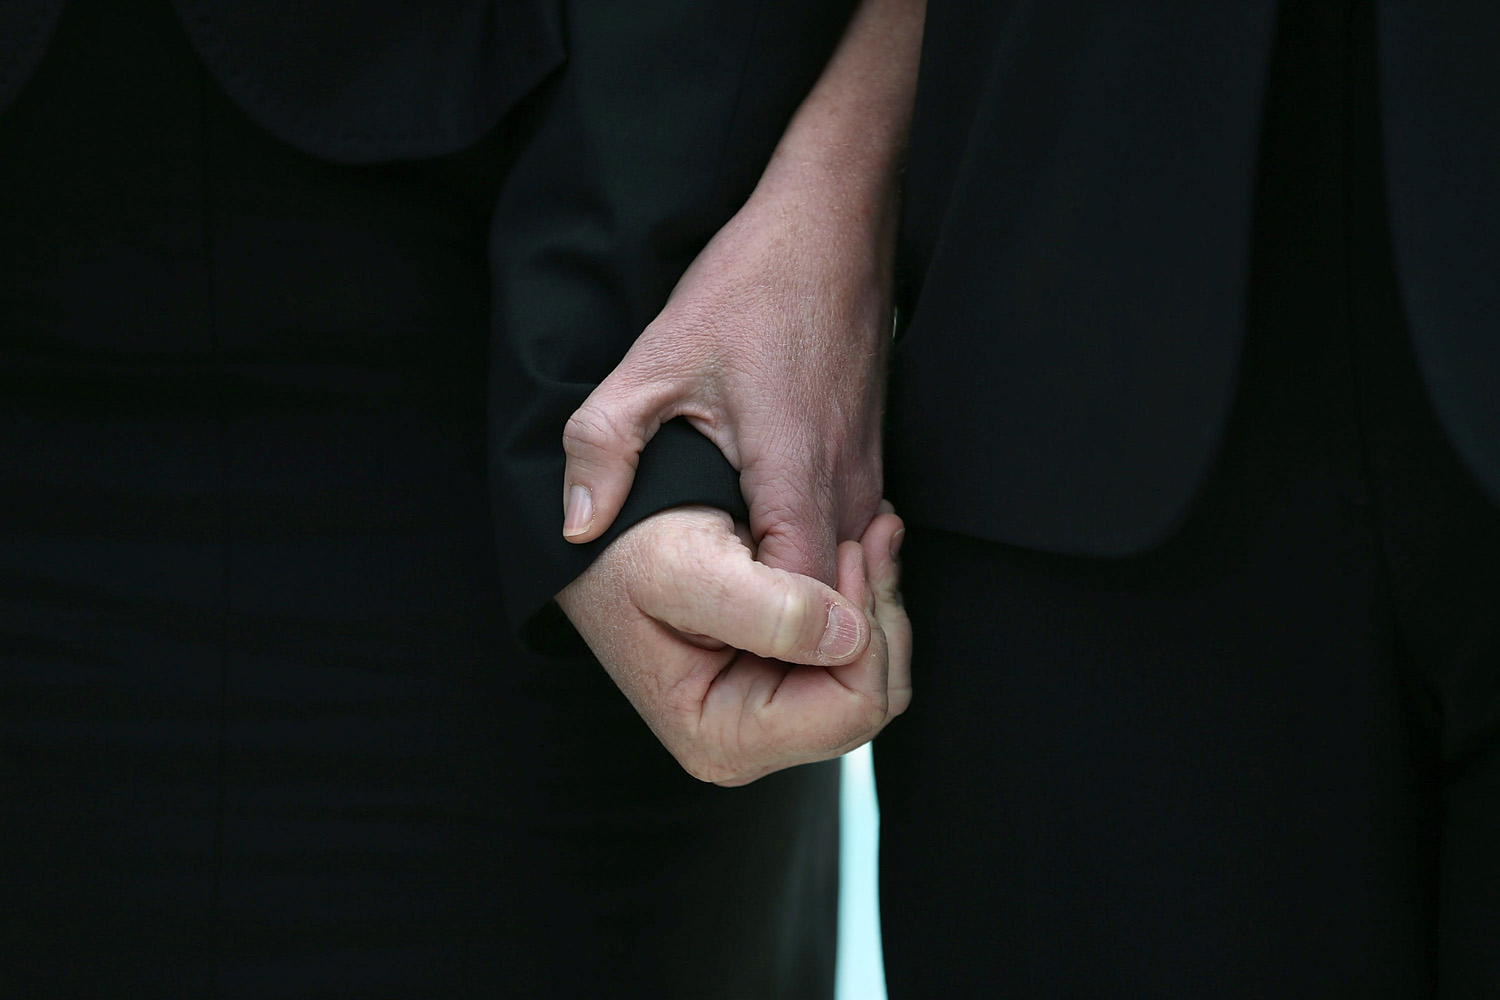 March 26, 2013. Plaintiff couple Sandy Steier (L) and Kris Perry hold hands after attending oral arguments at the U.S. Supreme Court after oral arguments in Washington, DC. This week, the high court heard arguments in California's Proposition 8, the controversial ballot initiative that defines marriage as between a man and a woman.